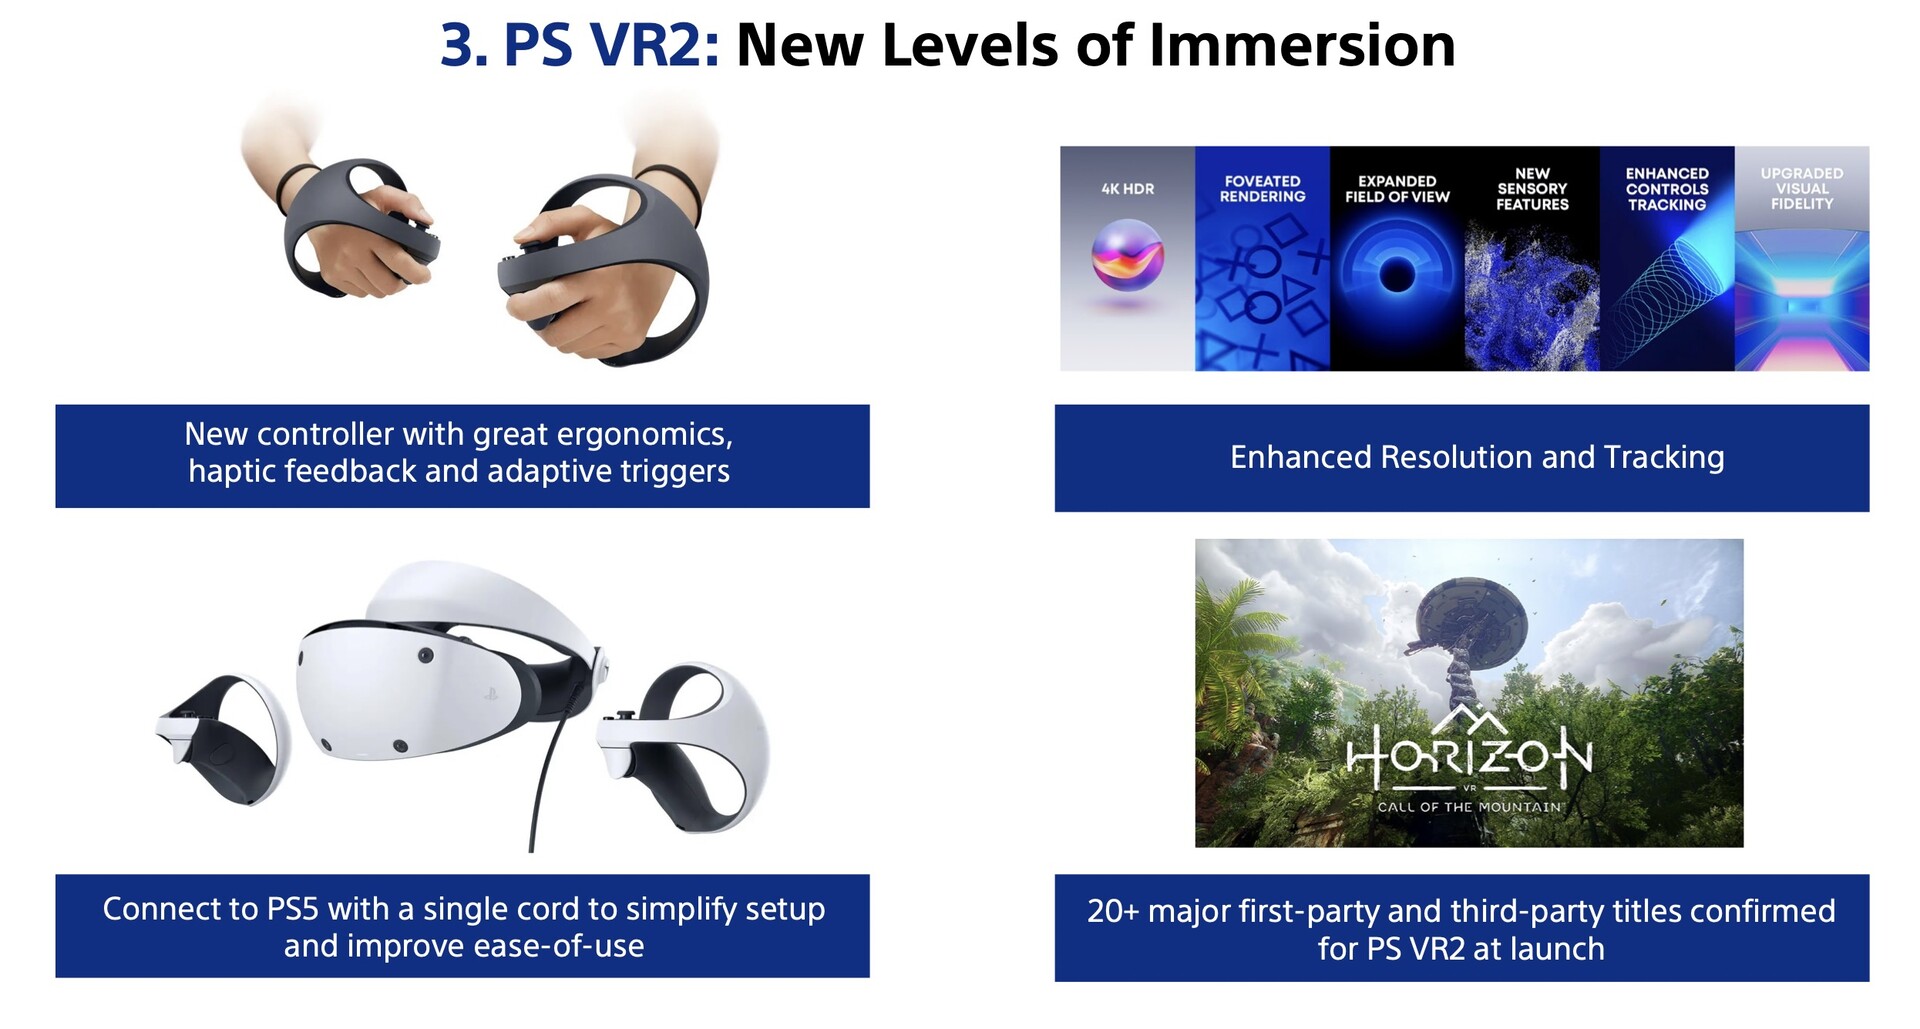 PSVR 2 Specs & Technical Analysis: Displays, Lenses, Reprojection, And More